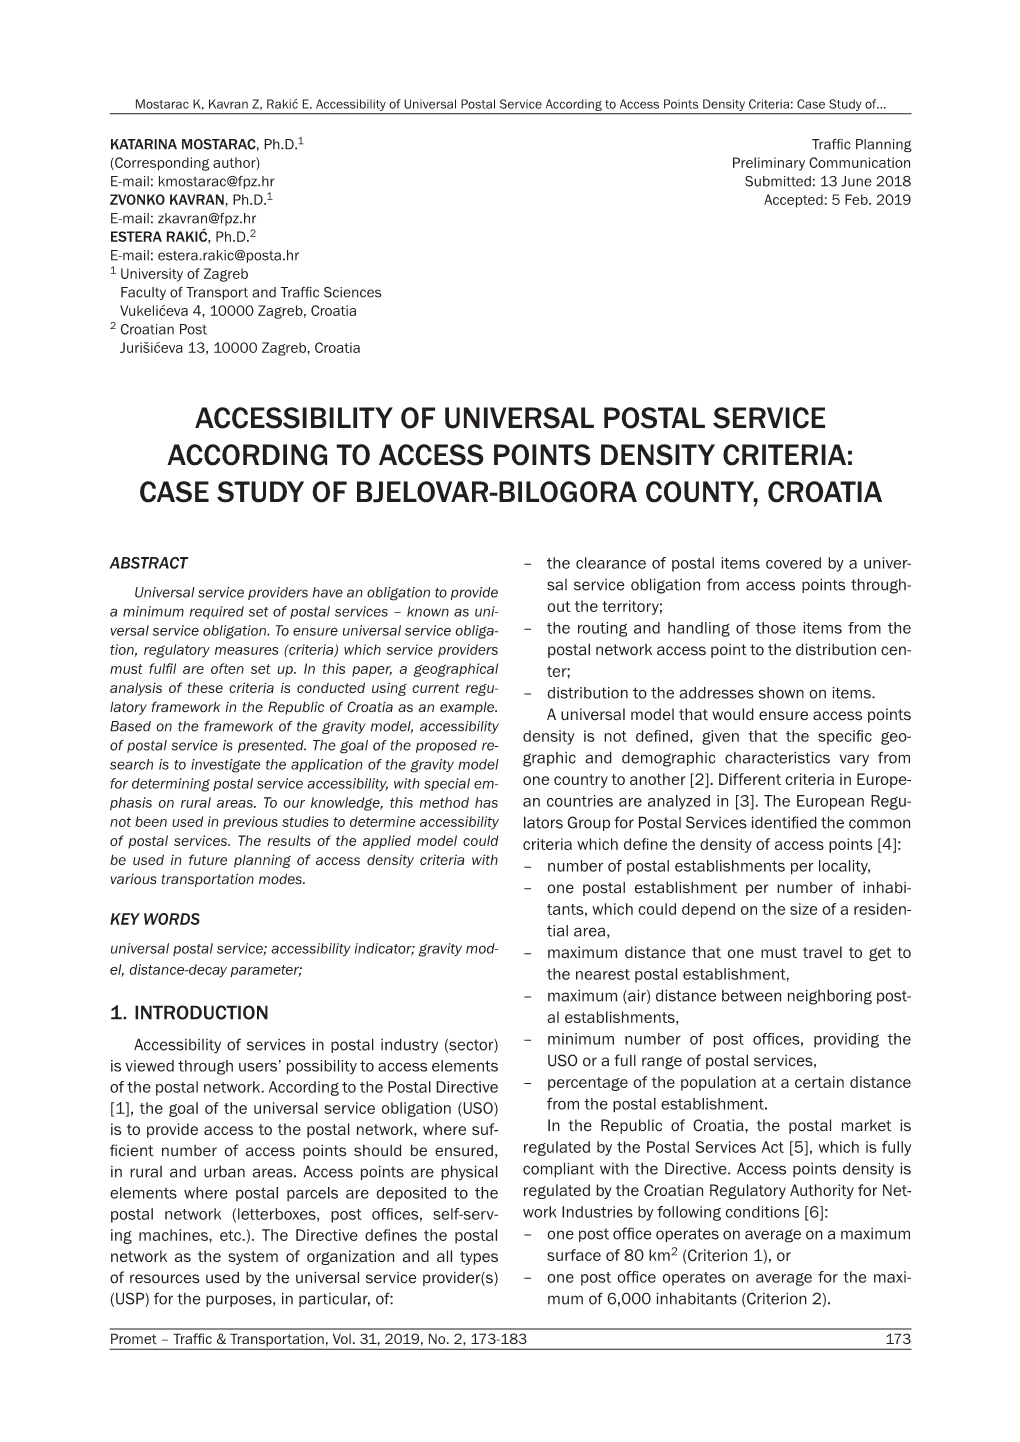 Accessibility of Universal Postal Service According to Access Points Density Criteria: Case Study Of